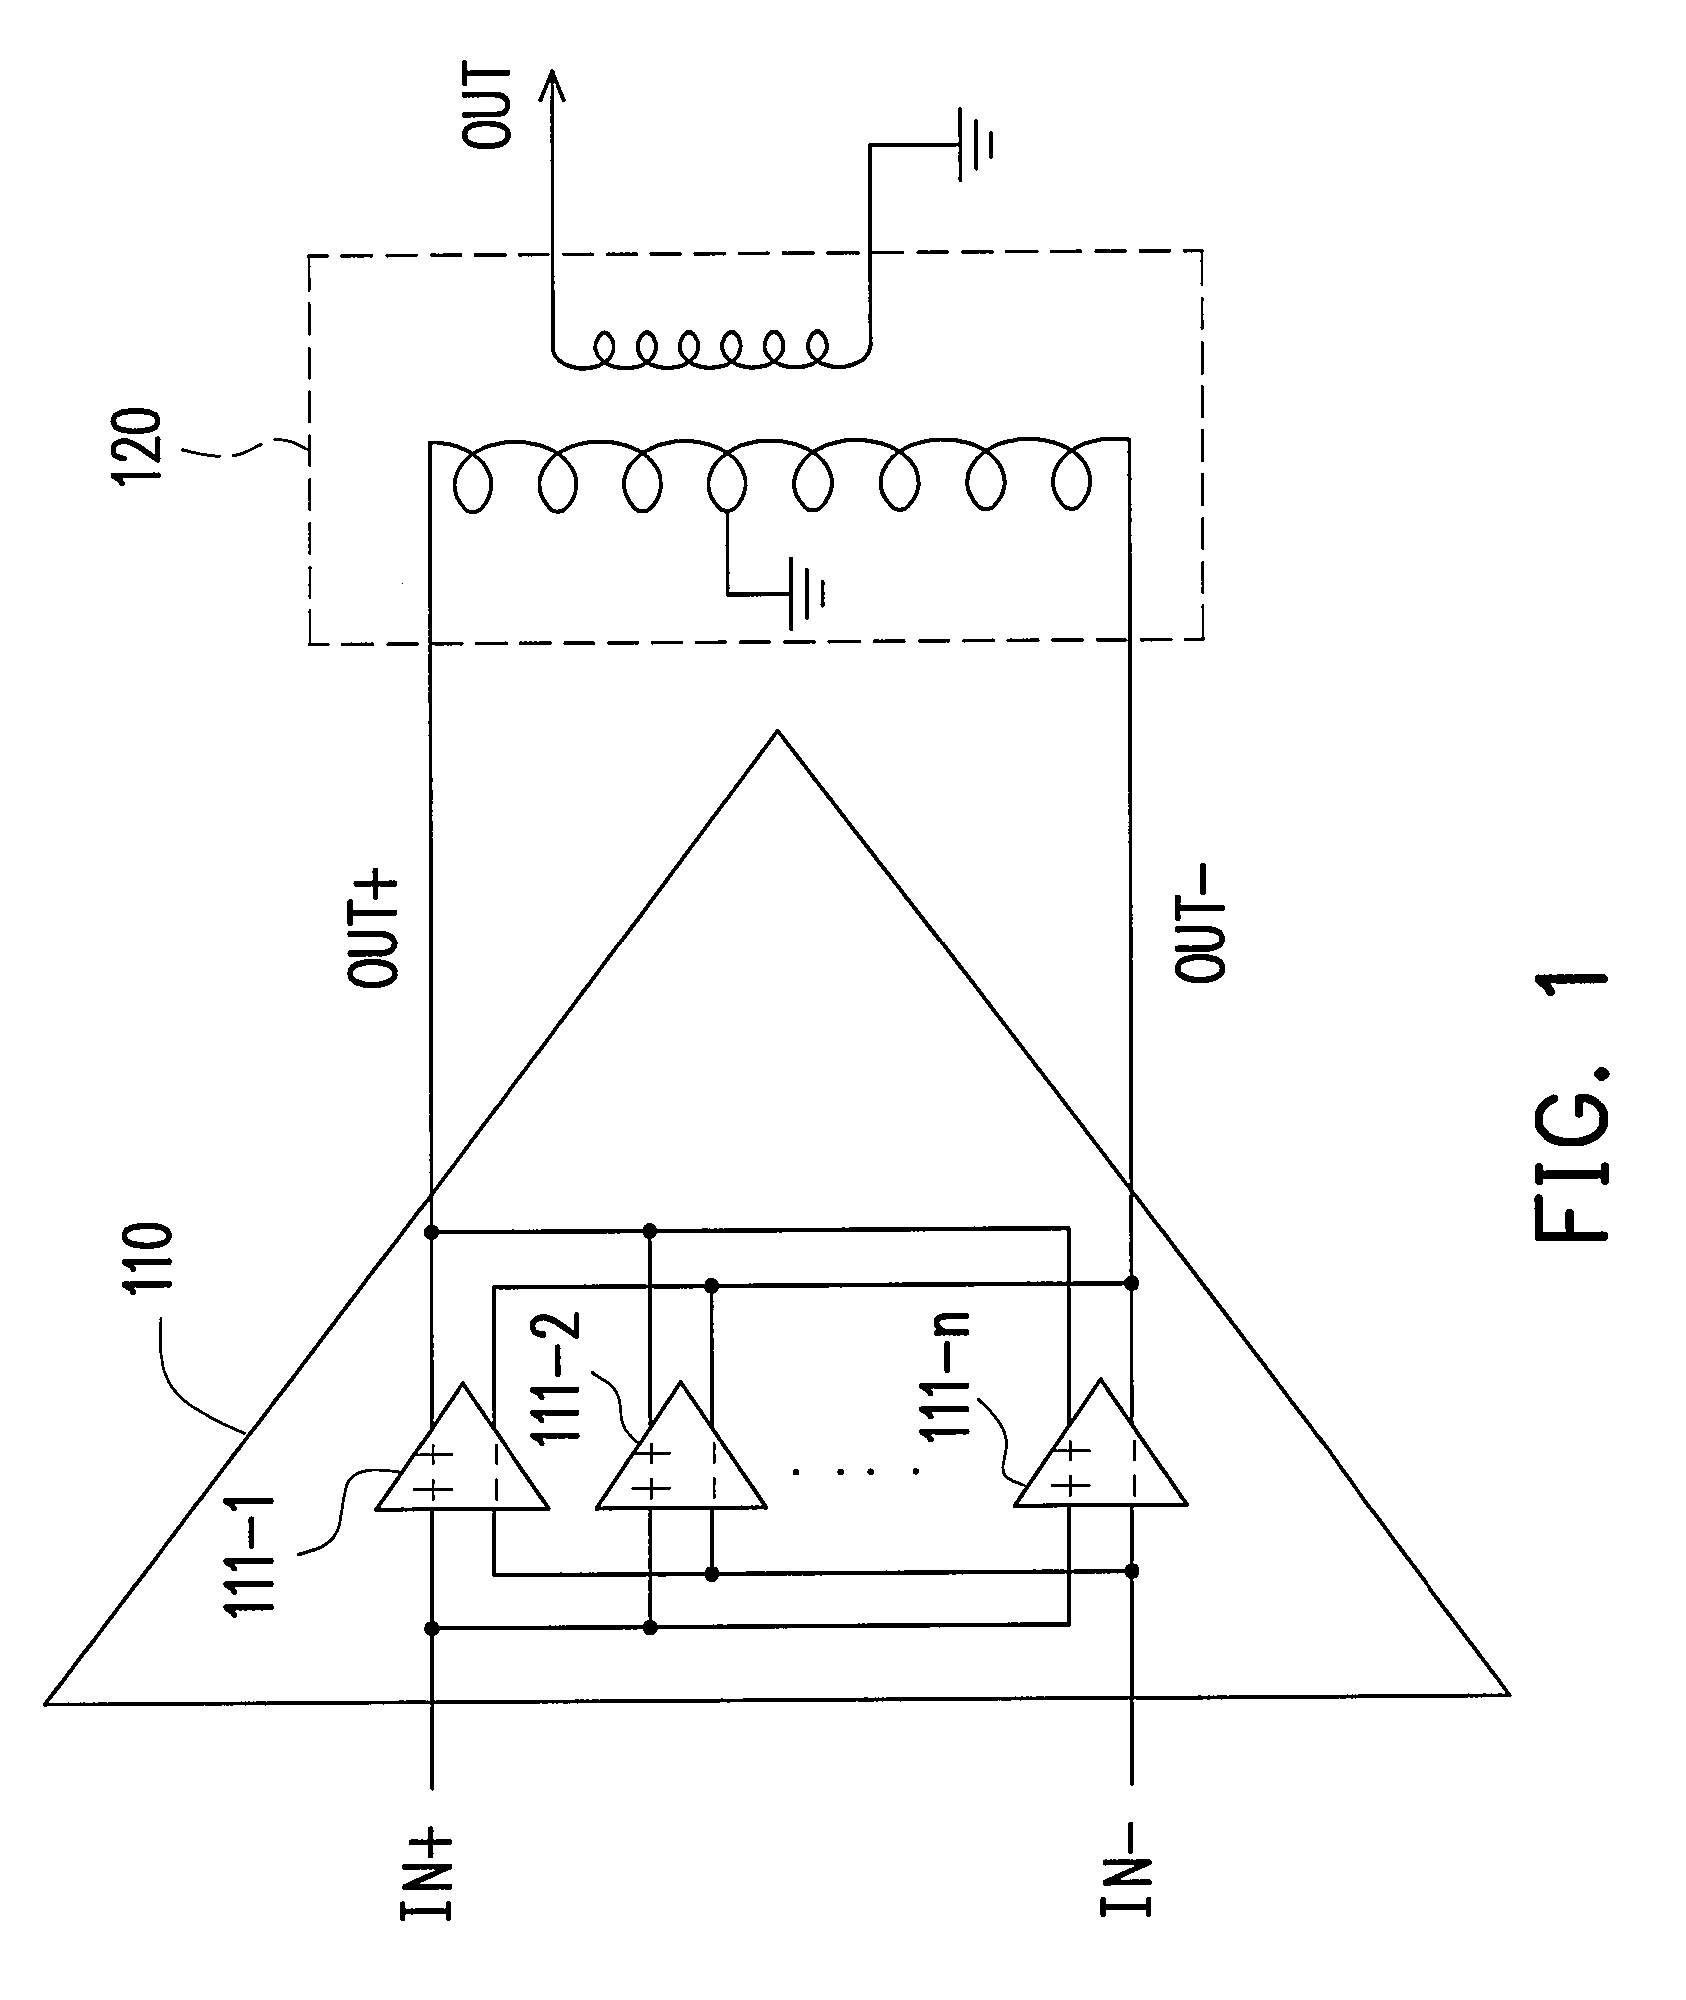 Layout of power device